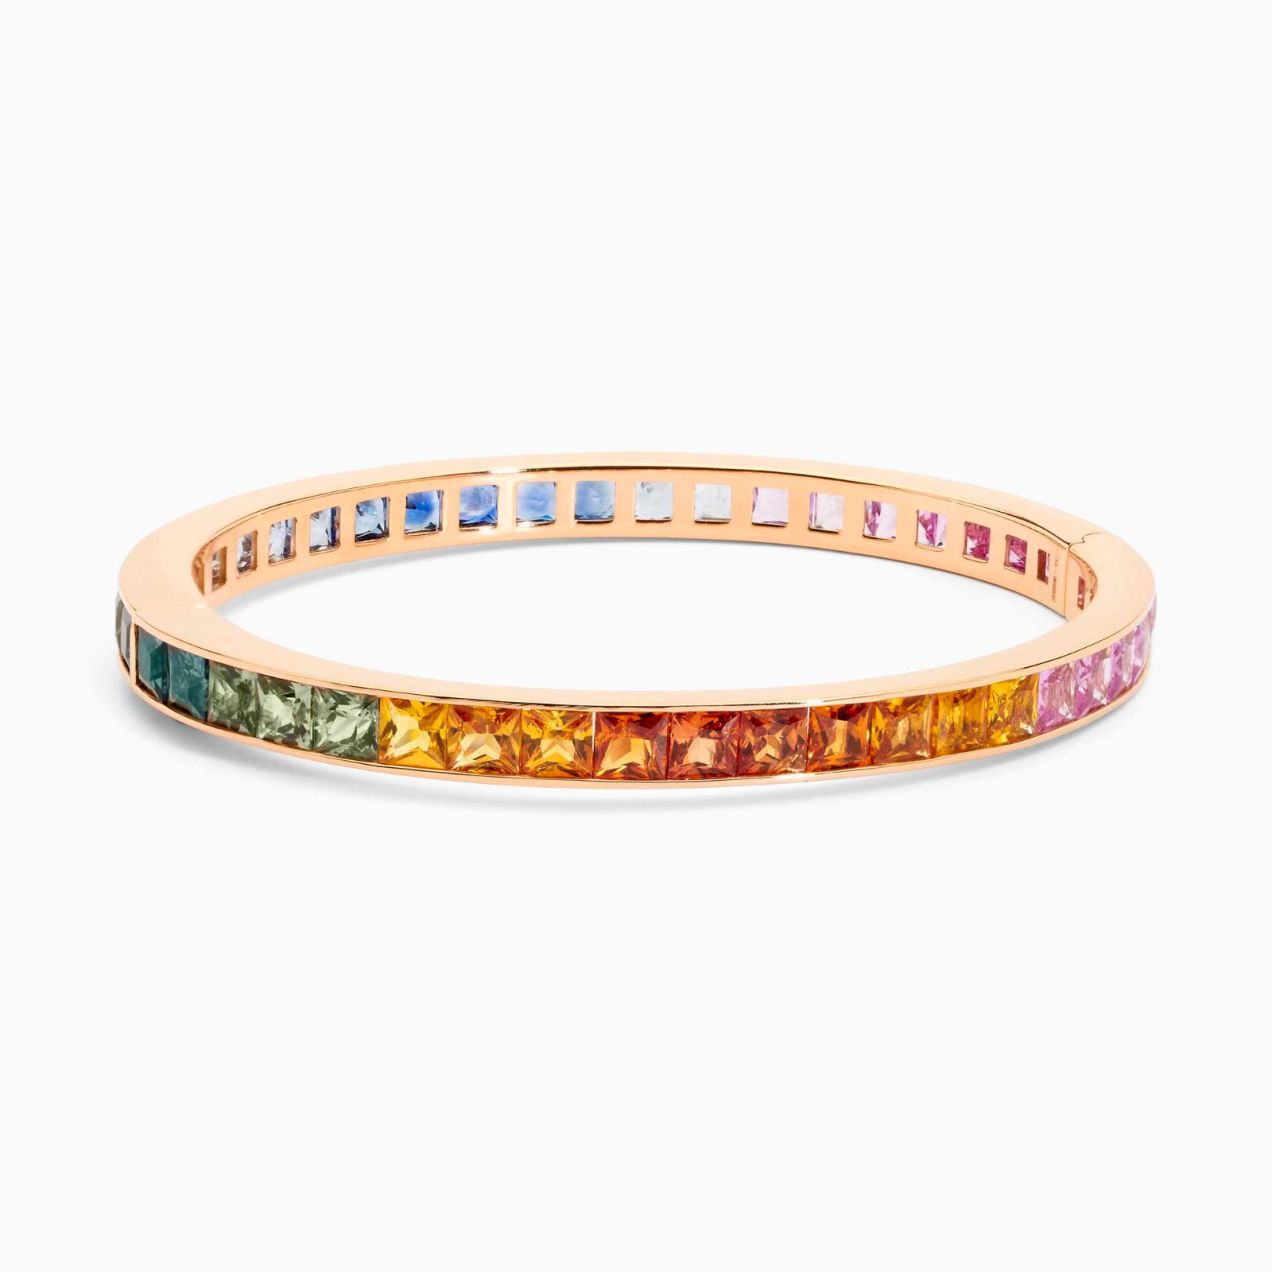 Rose gold cuff bracelet with multi-coloured sapphires